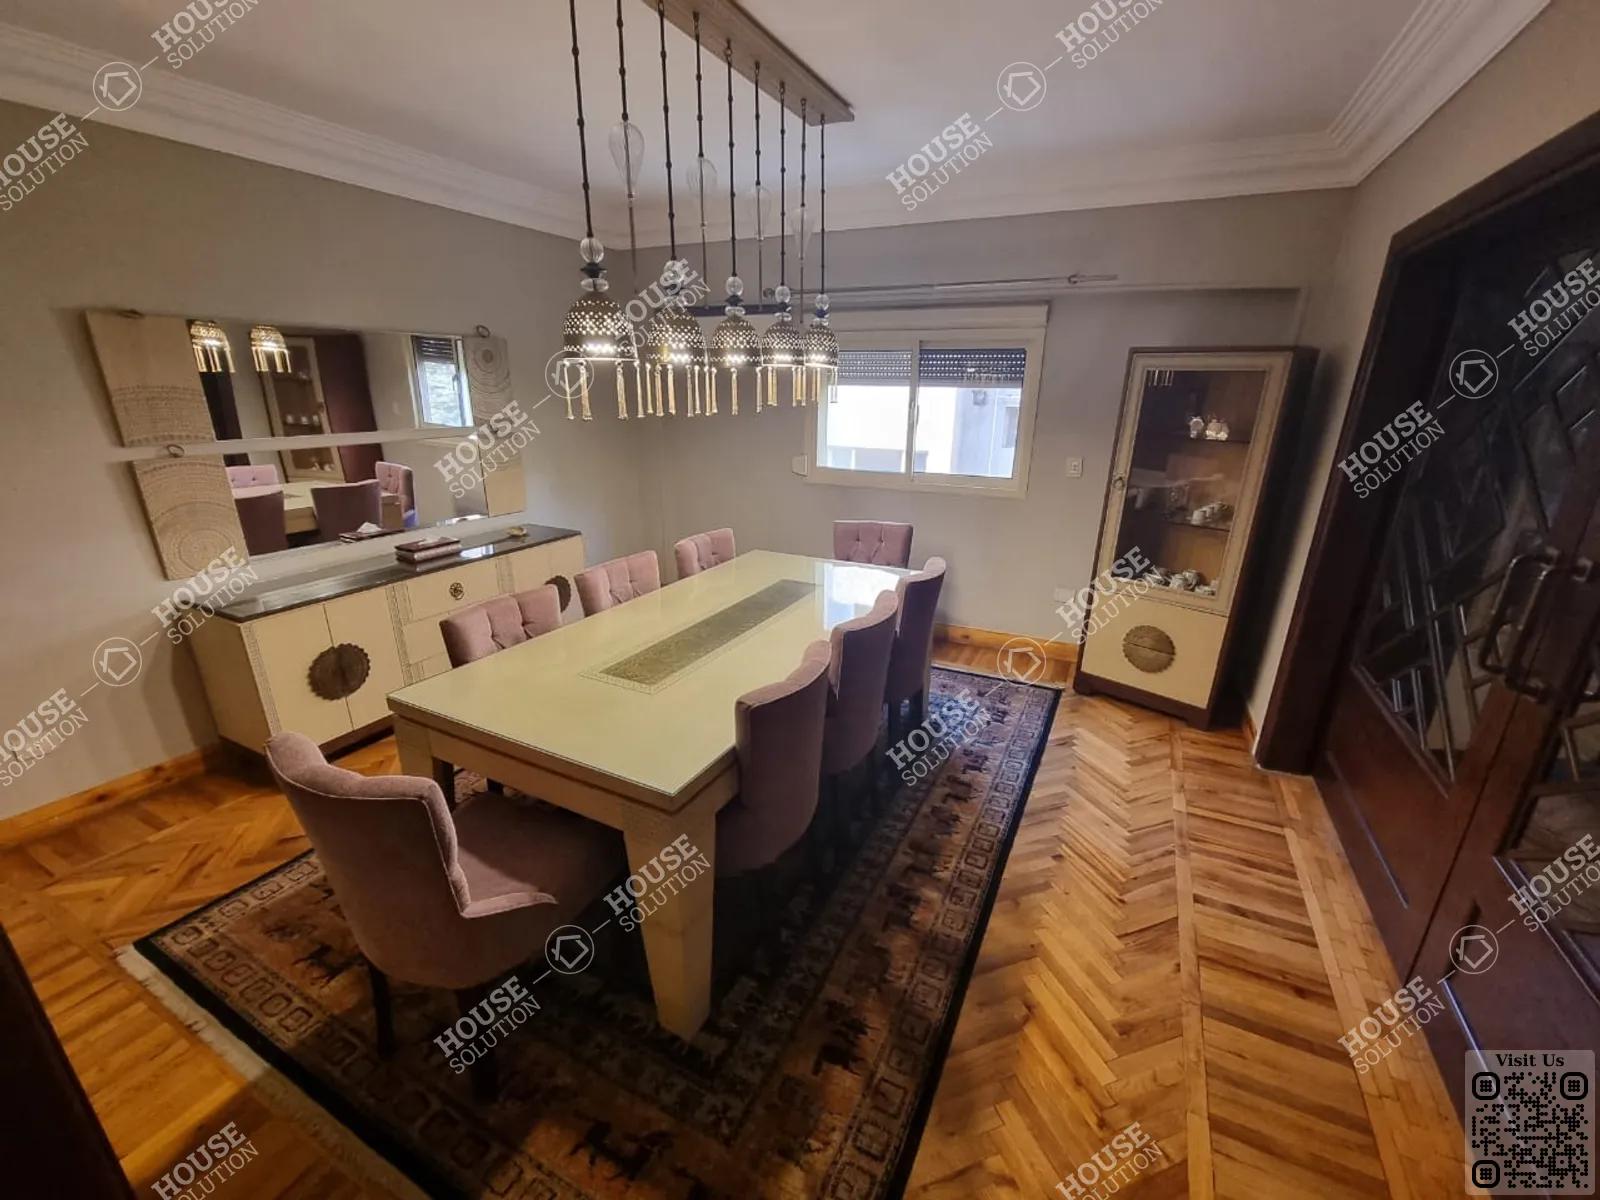 DINING AREA @ Apartments For Rent In Maadi Maadi Sarayat Area: 180 m² consists of 3 Bedrooms 2 Bathrooms Modern furnished 5 stars #5630-1